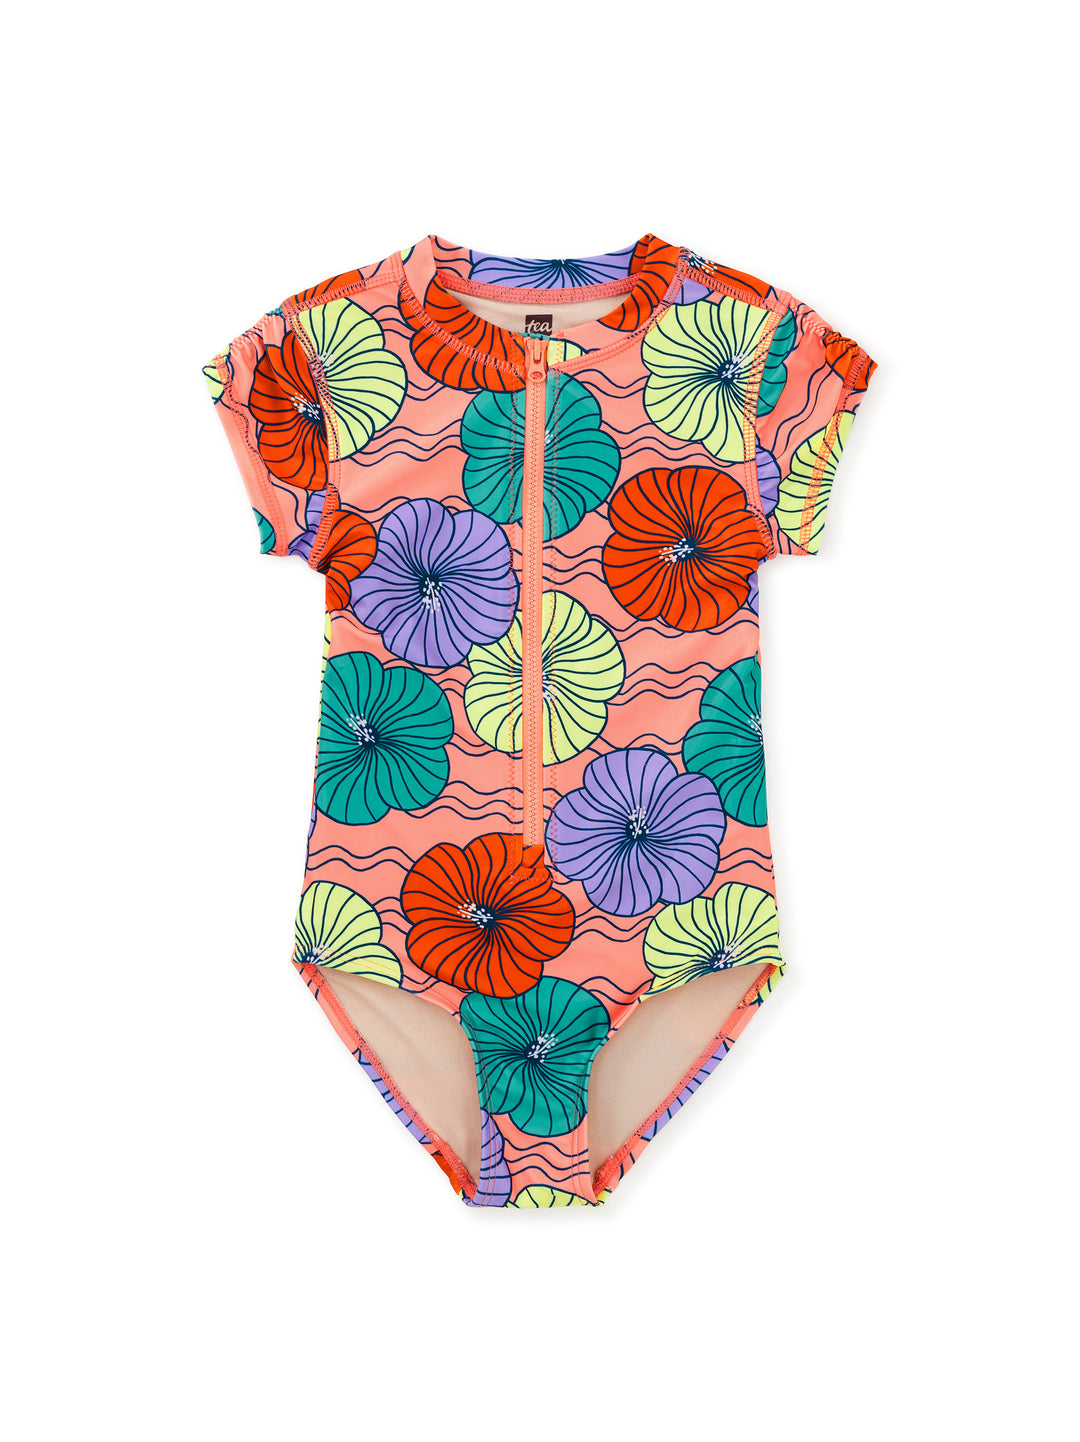 Tea Collection Rash Guard One-Piece Swimsuit - Leso Hibiscus